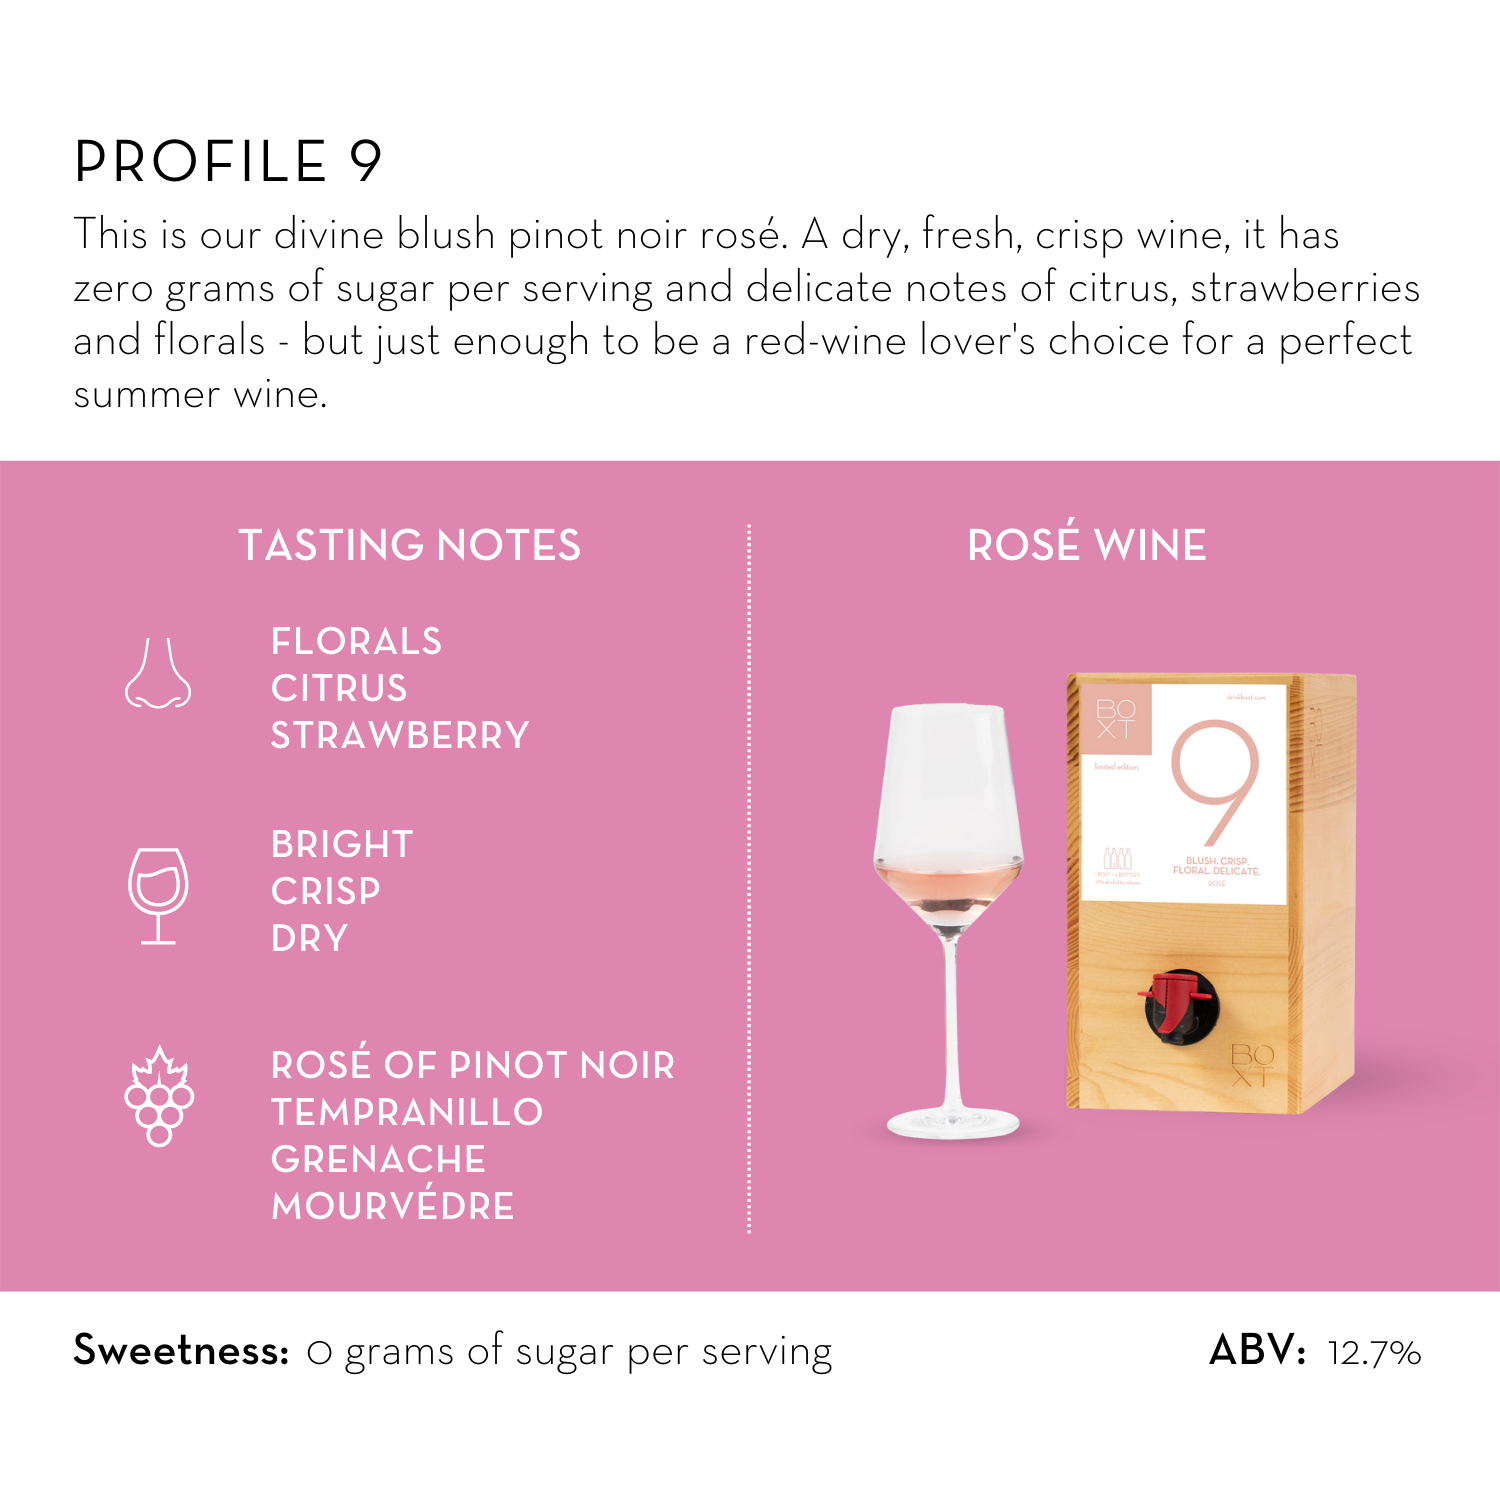 @drinkboxt profile 9, rose of pinot noir